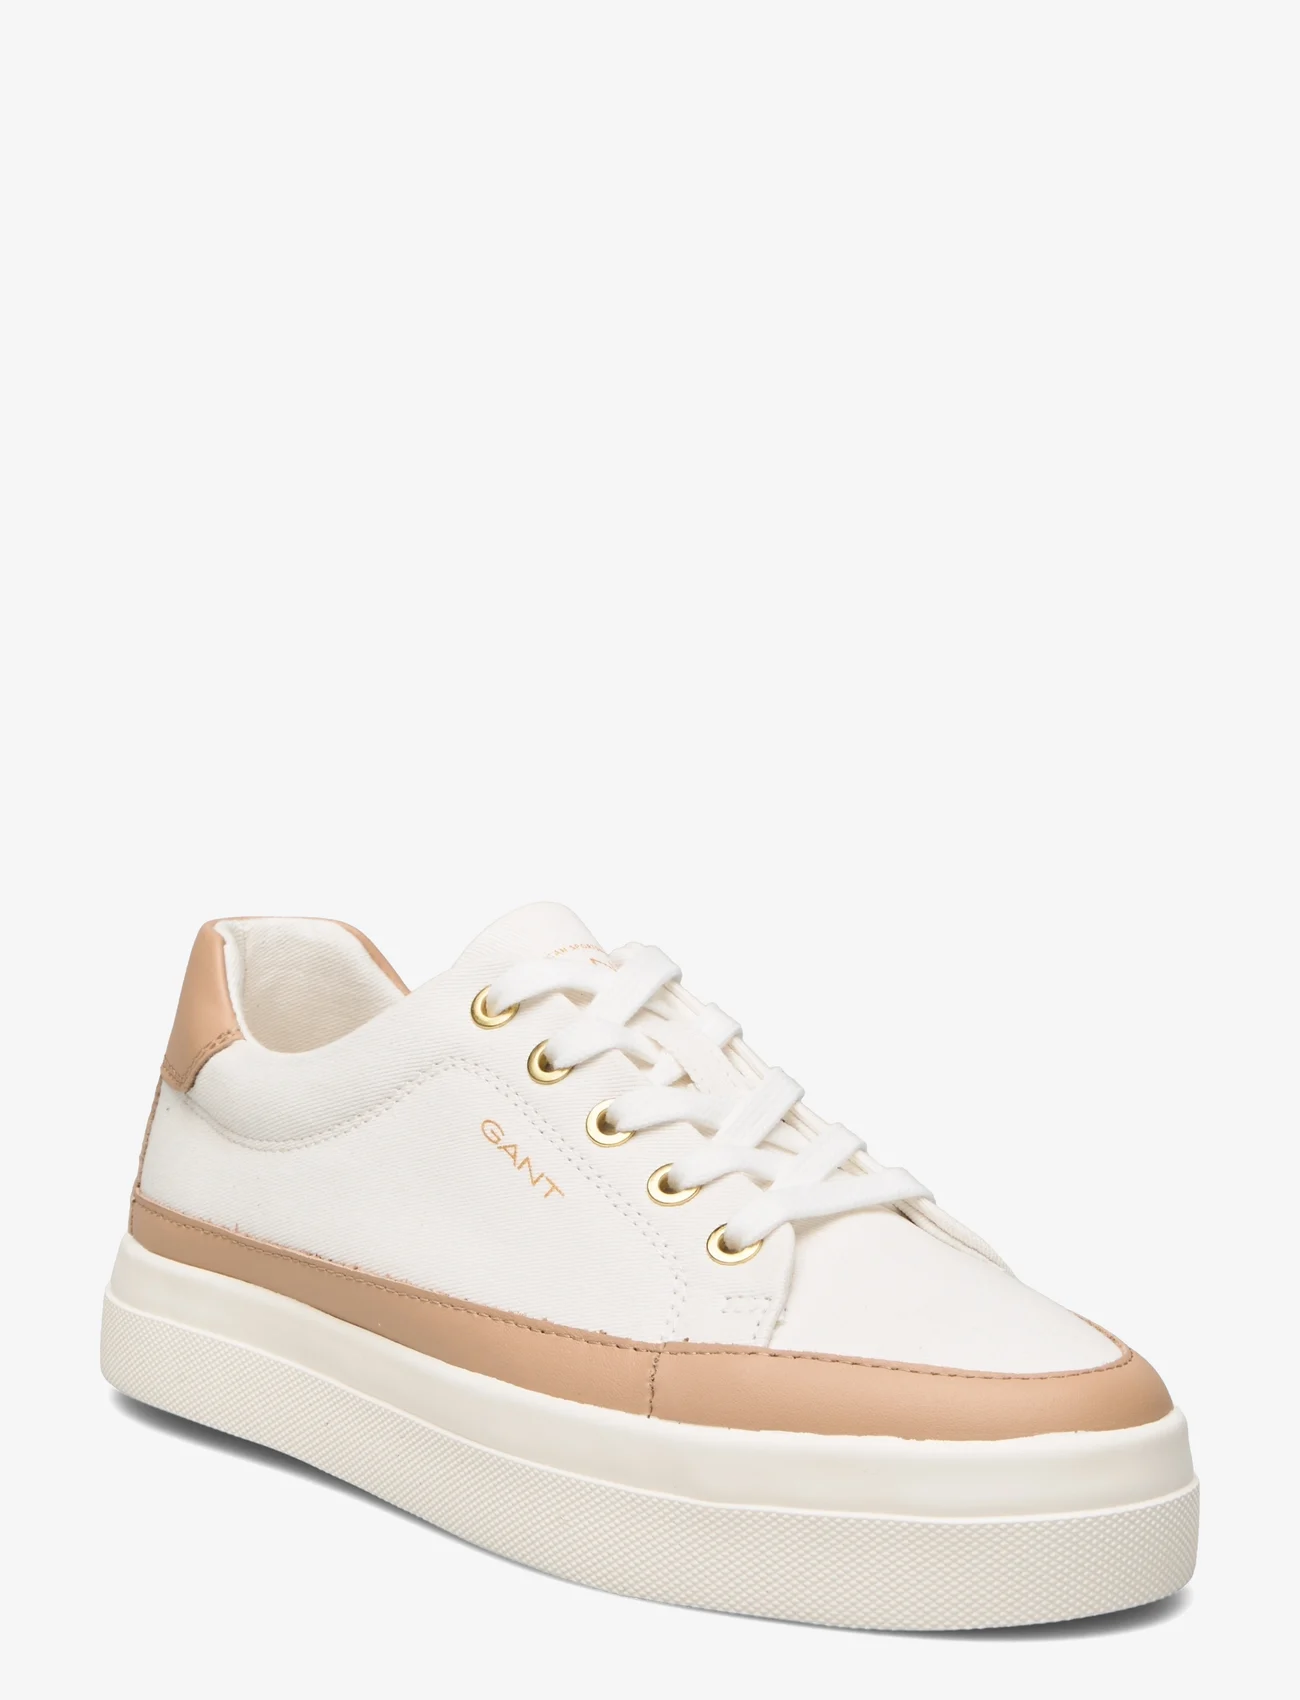 GANT - Avona Sneaker - lave sneakers - offwht./natural - 0